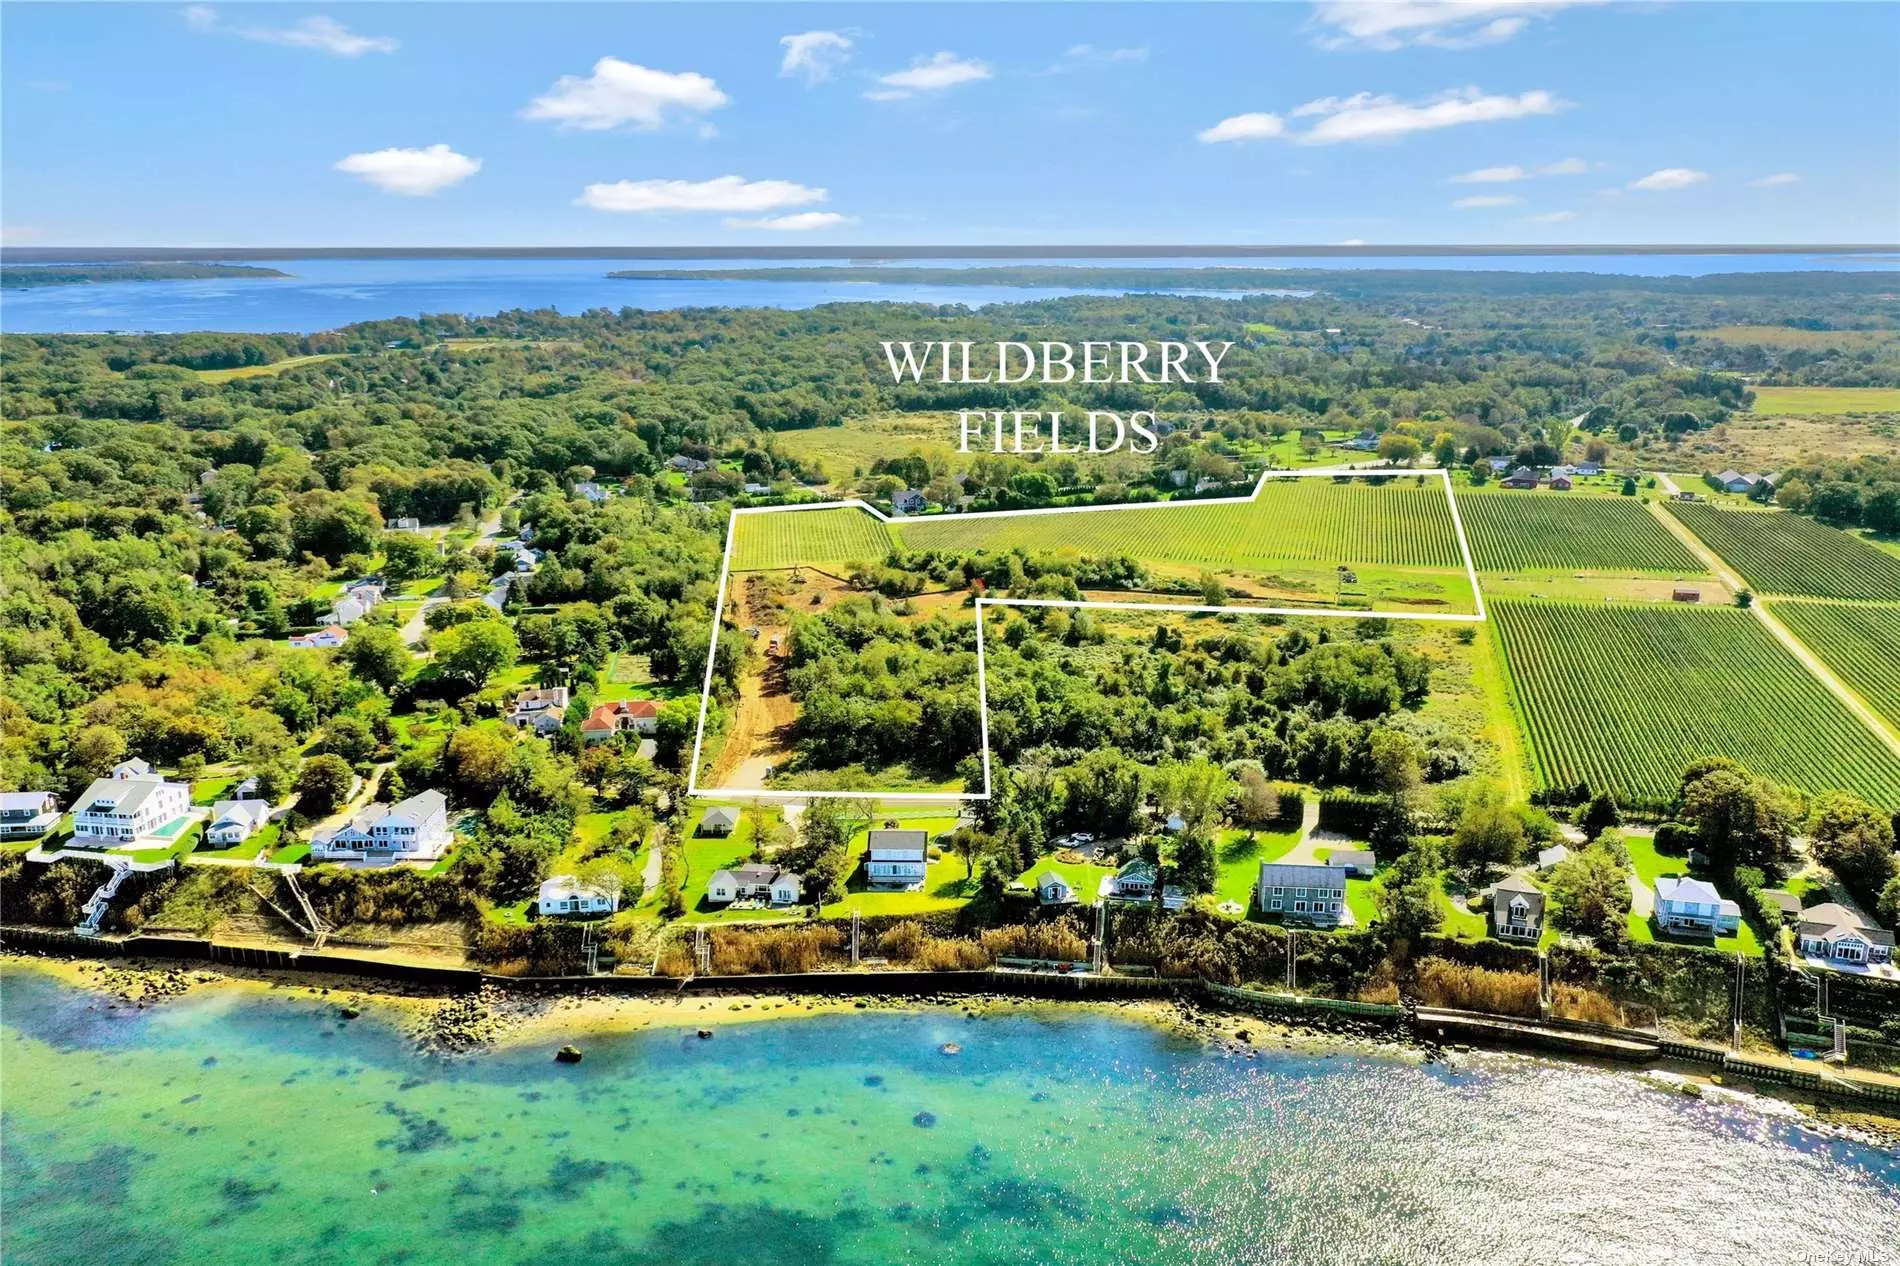 Wildberry Fields, Southold. Incomparable opportunity to own one or more building parcels in a prime Southold location. Yes, location still matters. First offering of an approved subdivision of 9 level, buildable lots ranging in size from 1/2 - 3/4+ acres. Each parcel will have underground utilities in place. Located on a country lane with miles of low traffic, meandering road perfect for family walks, runners, and bicycle enthusiasts. Wildberry Fields is part of the Southold Park District, within close proximity to 3 magnificent Sound beaches. Parcels will be sold subject to review and acceptance of covenants & restrictions. All of this amidst the bucolic North Fork vineyards, farm stands, and restaurants nearby. There&rsquo;s nothing else like it. Build your dream home.